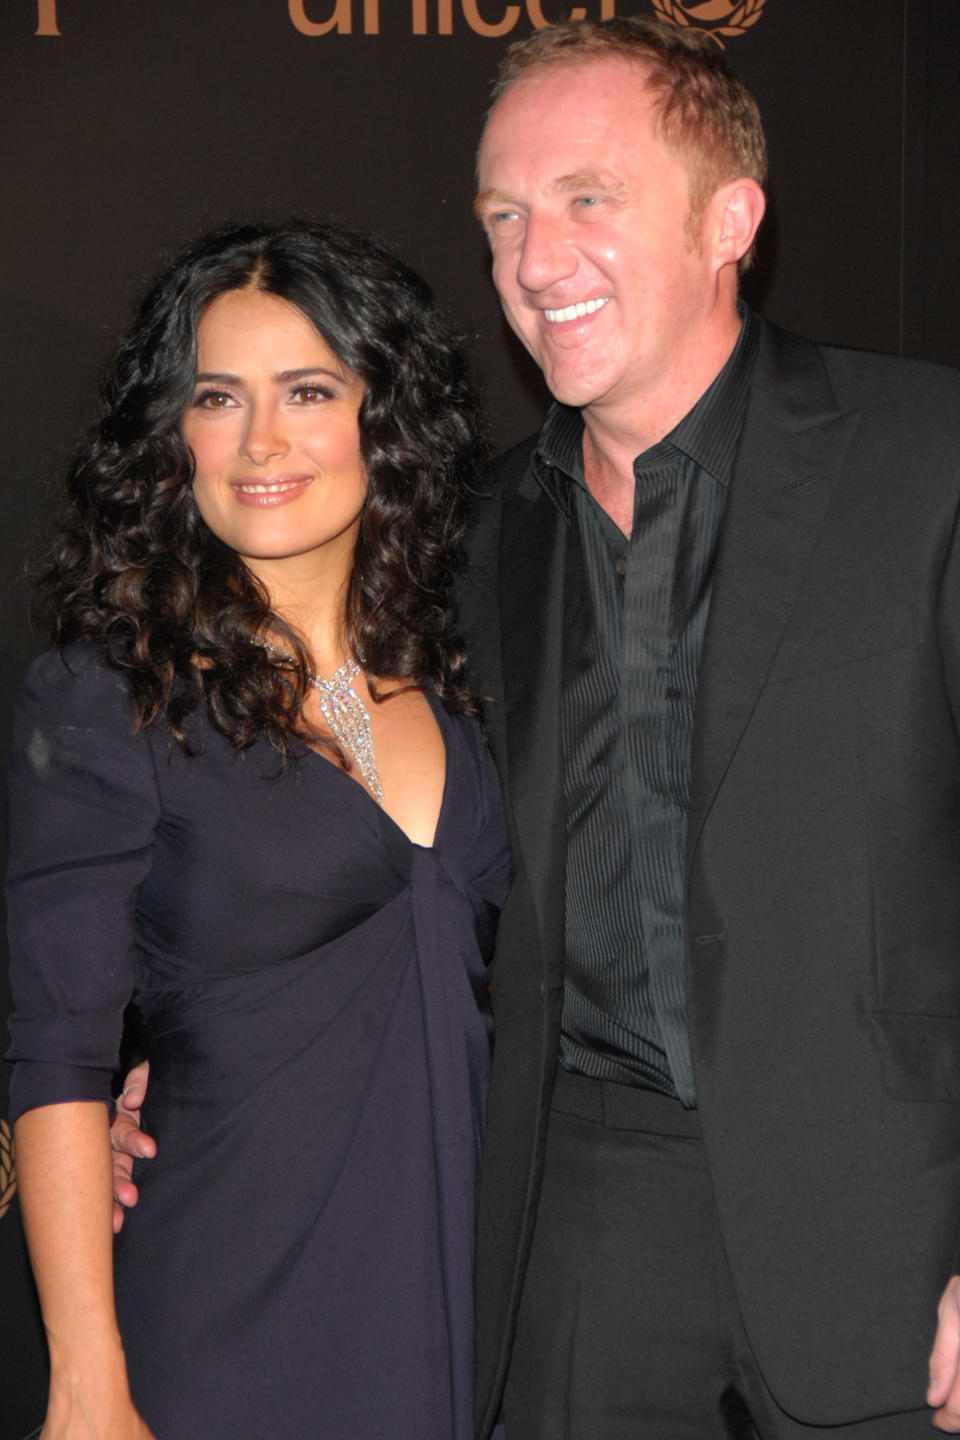 NEW YORK, NY - FEBRUARY 6: Salma Hayek and Francois-Henri Pinault attend GUCCI and MADONNA host A NIGHT TO BENEFIT RAISING MALAWI AND UNICEF at the United Nations on February 6, 2008 in New York City. (Photo by CHANCE YEH/Patrick McMullan via Getty Images)